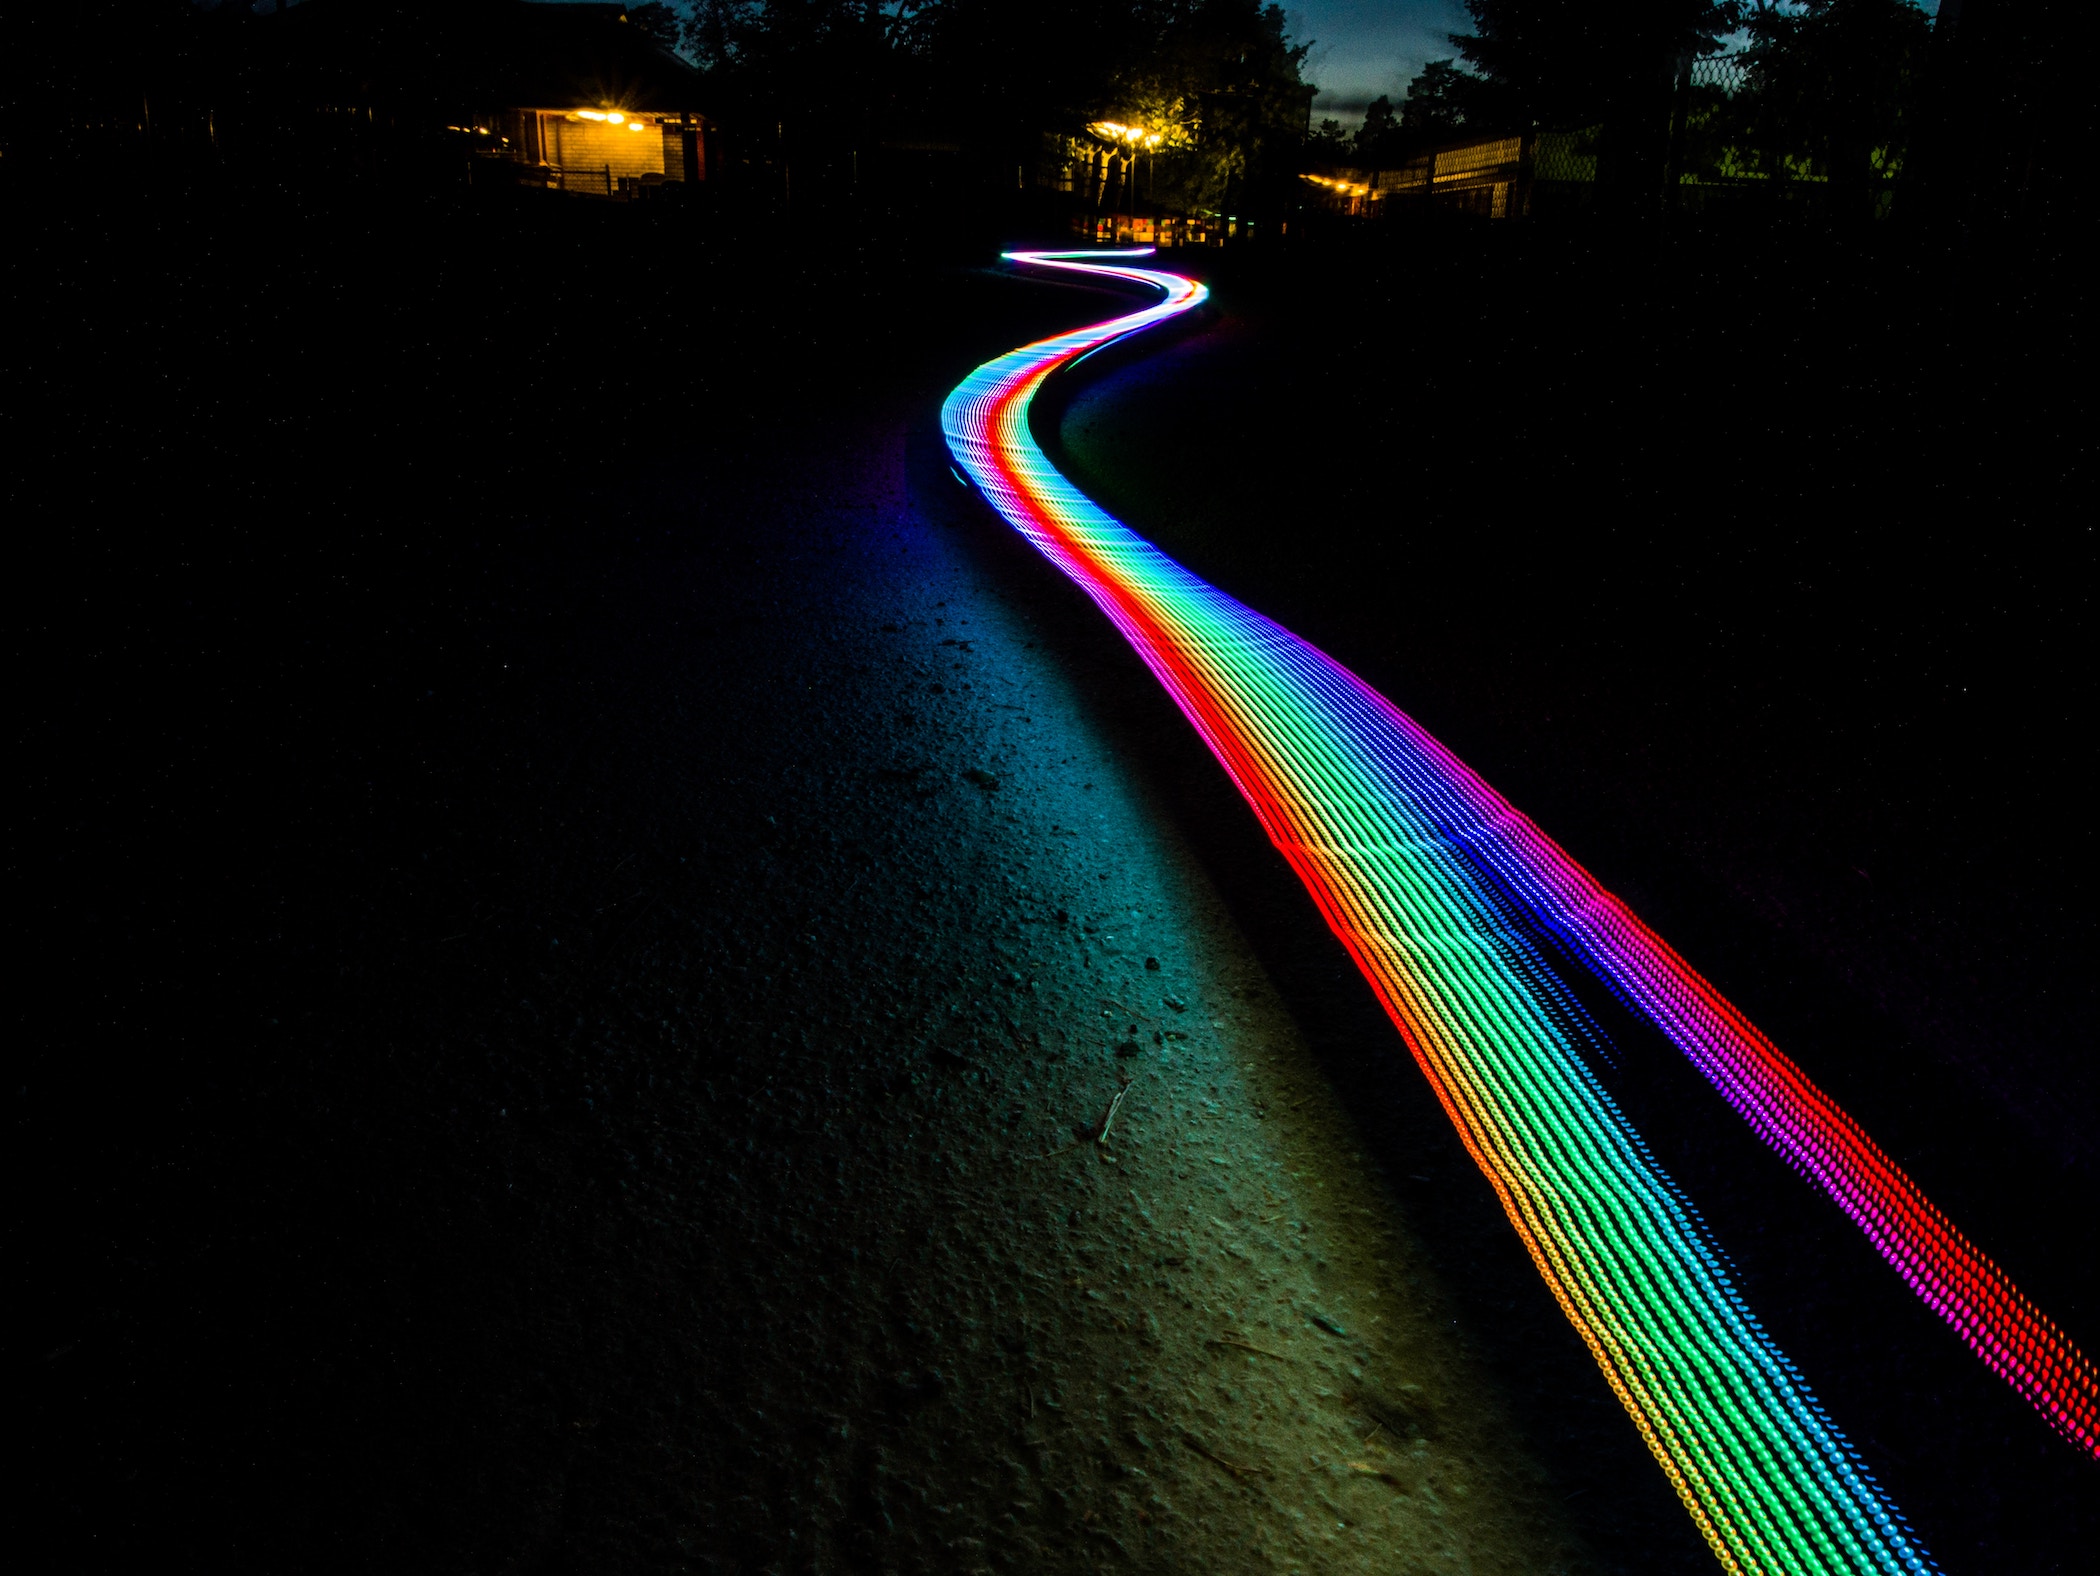 RGB flow on a road at night